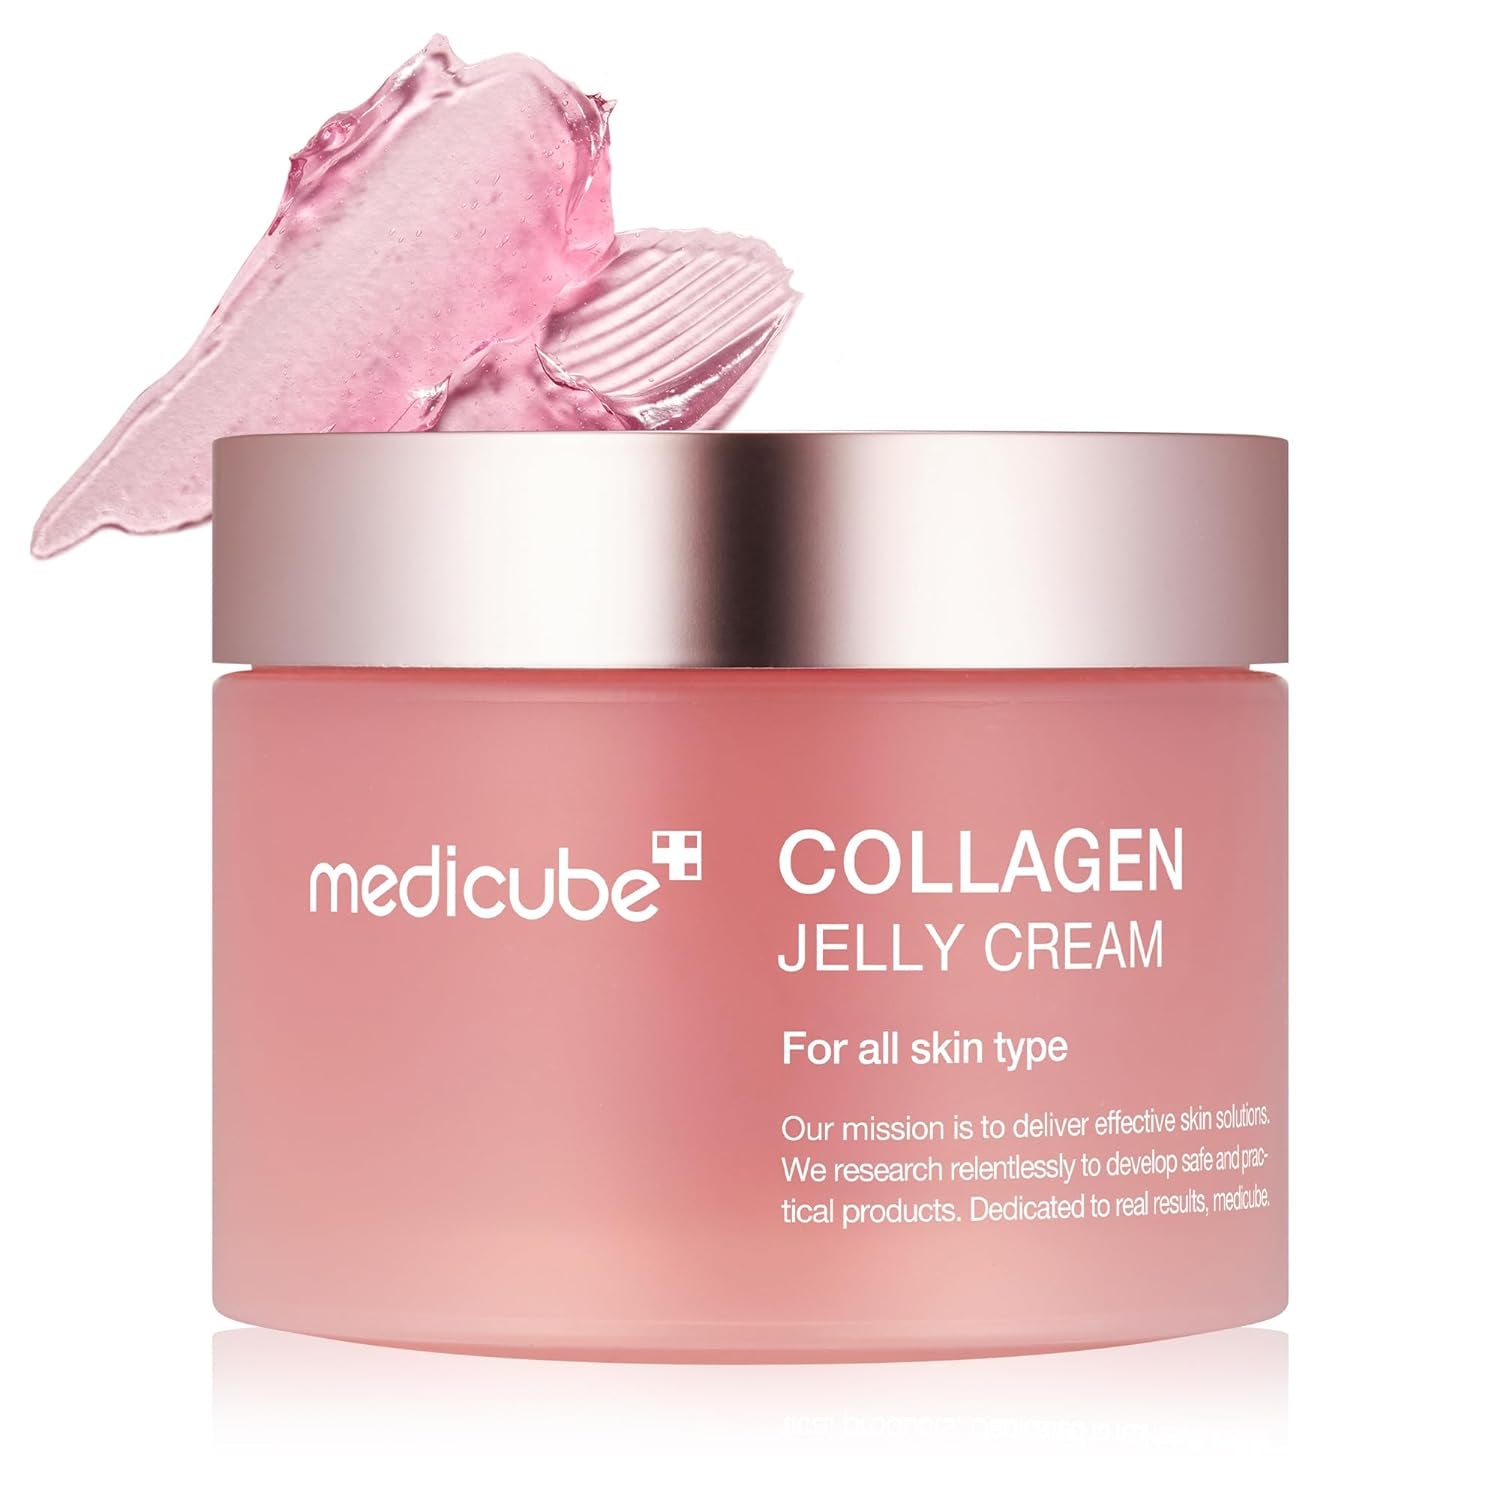 Collagen Jelly Cream- Niacinamide & Freeze-Dried Hydrolyzed Collagen - Boosts Skin'S Barrier Hydration and Gives 24H Glow & Lifted Look - No Artificial Color, Korean Skincare (3.71 Fl.Oz.)